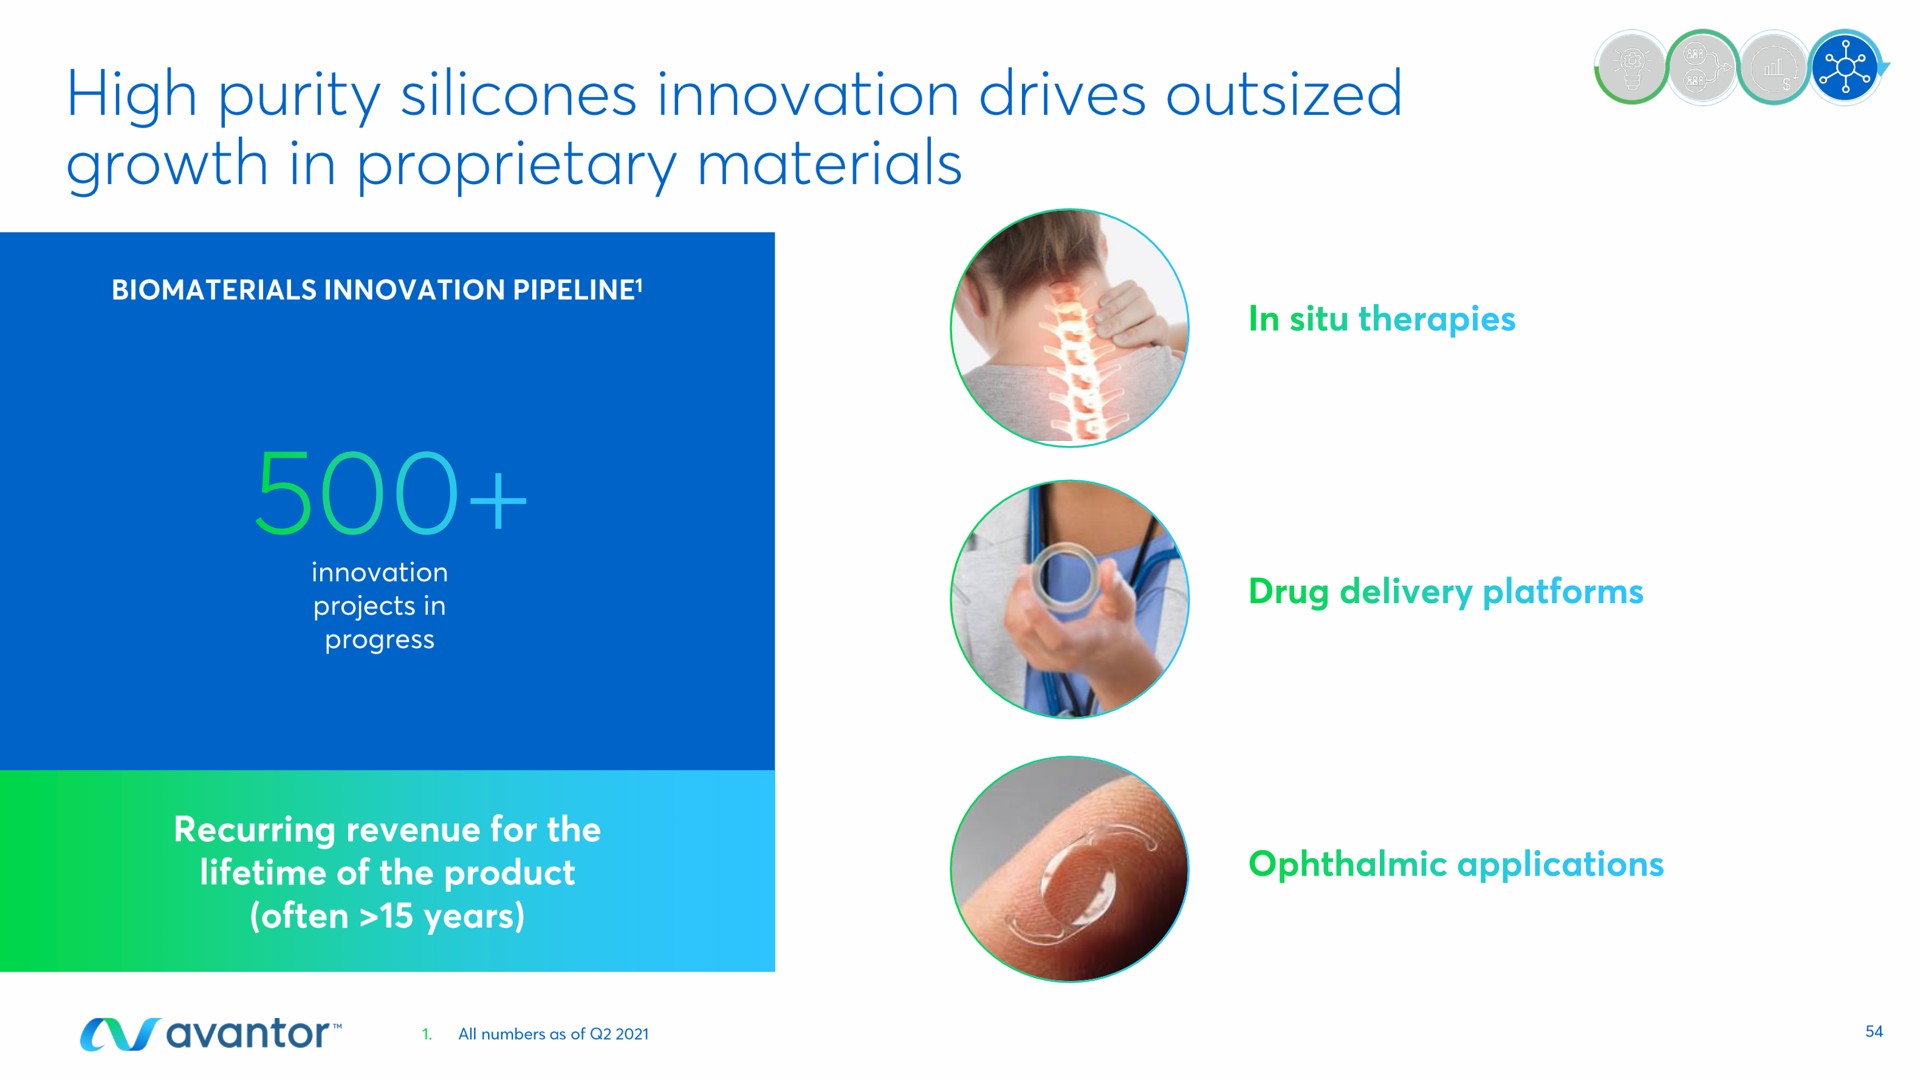 high purity silicones innovation drives outsized growth in proprietary materials | Avantor